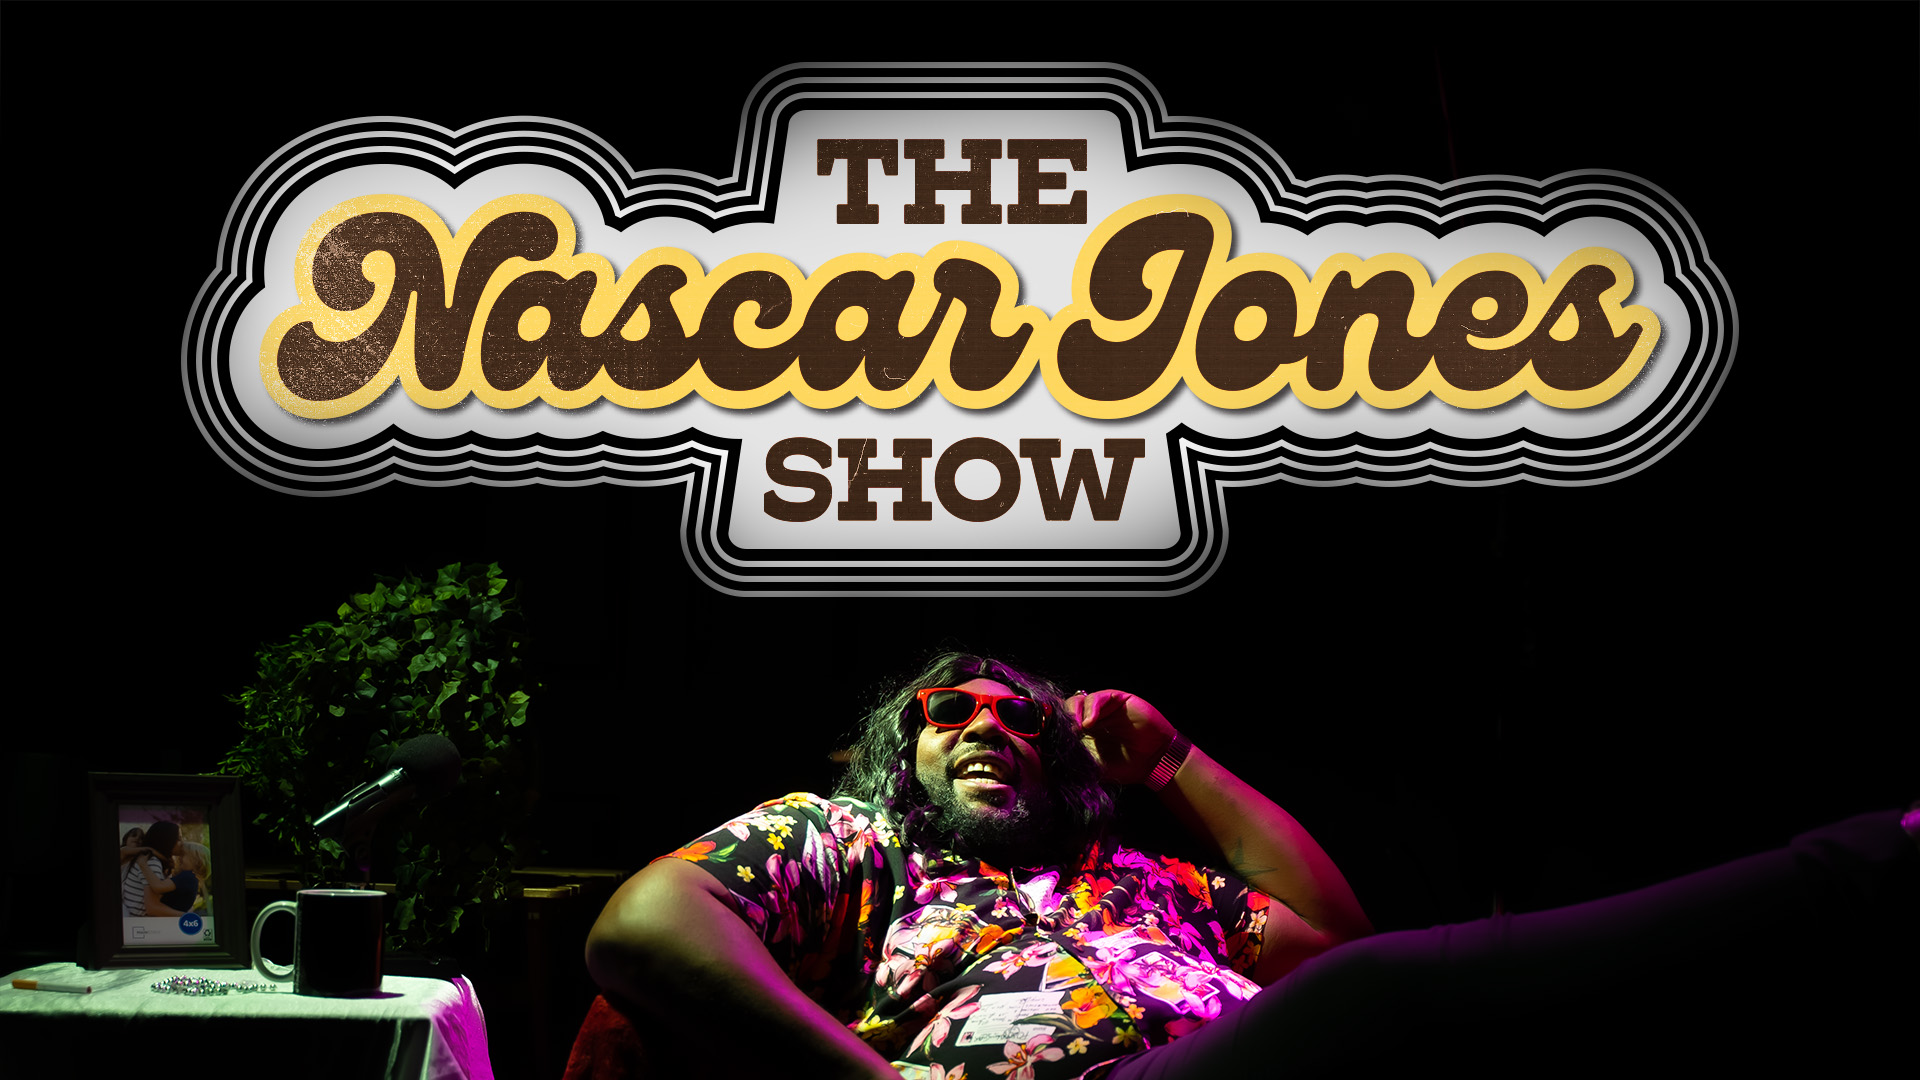 The Nascar Jones Show is a live, improvised comedy talk show in Norfolk, Virginia